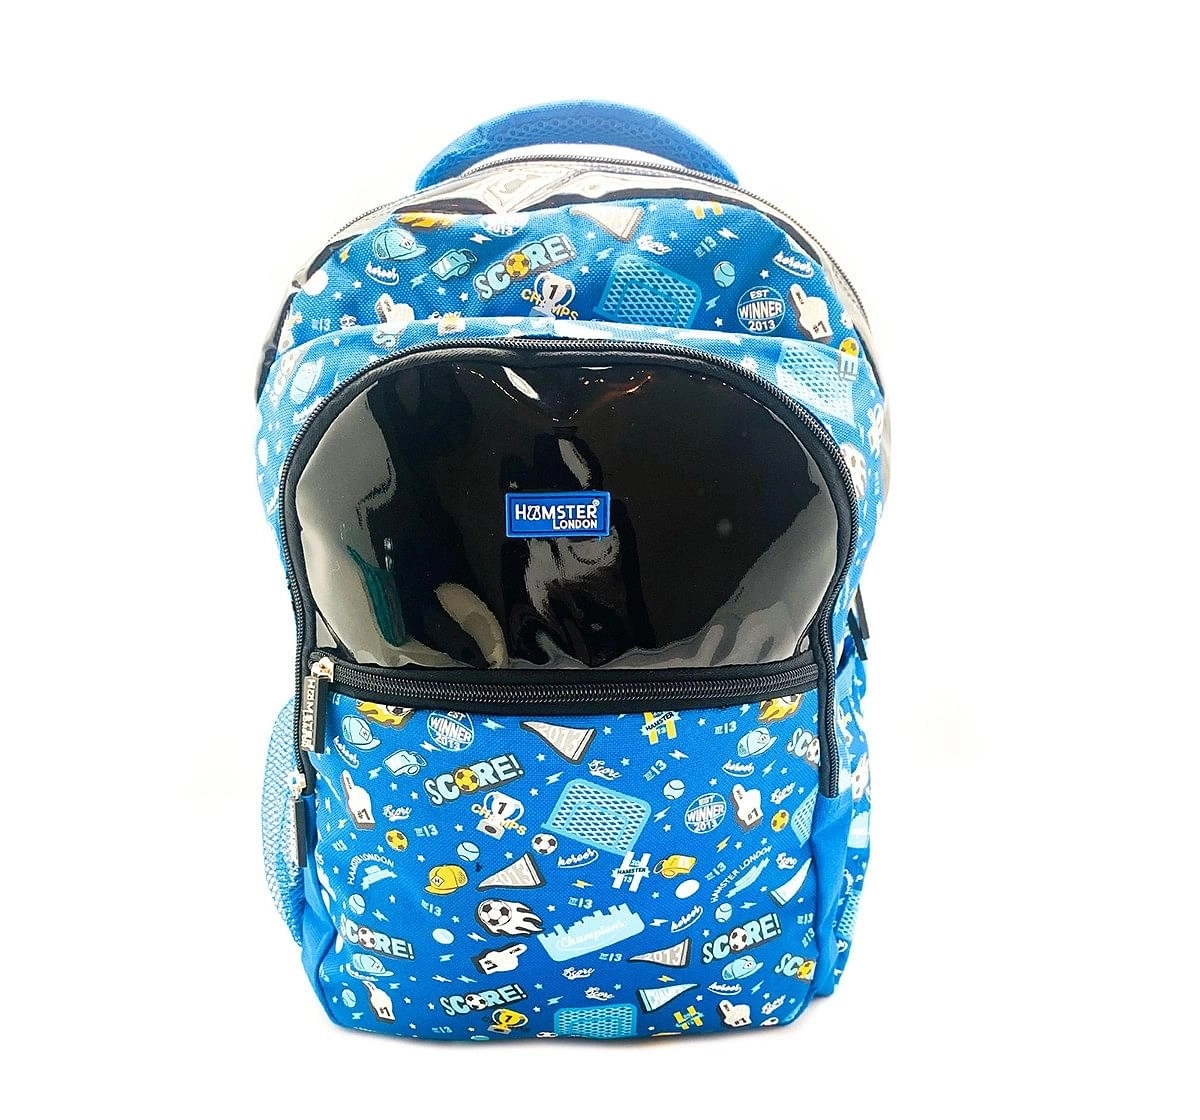 Hamster London Soccer Theme Big Backpack for age 3Y+ (Blue)